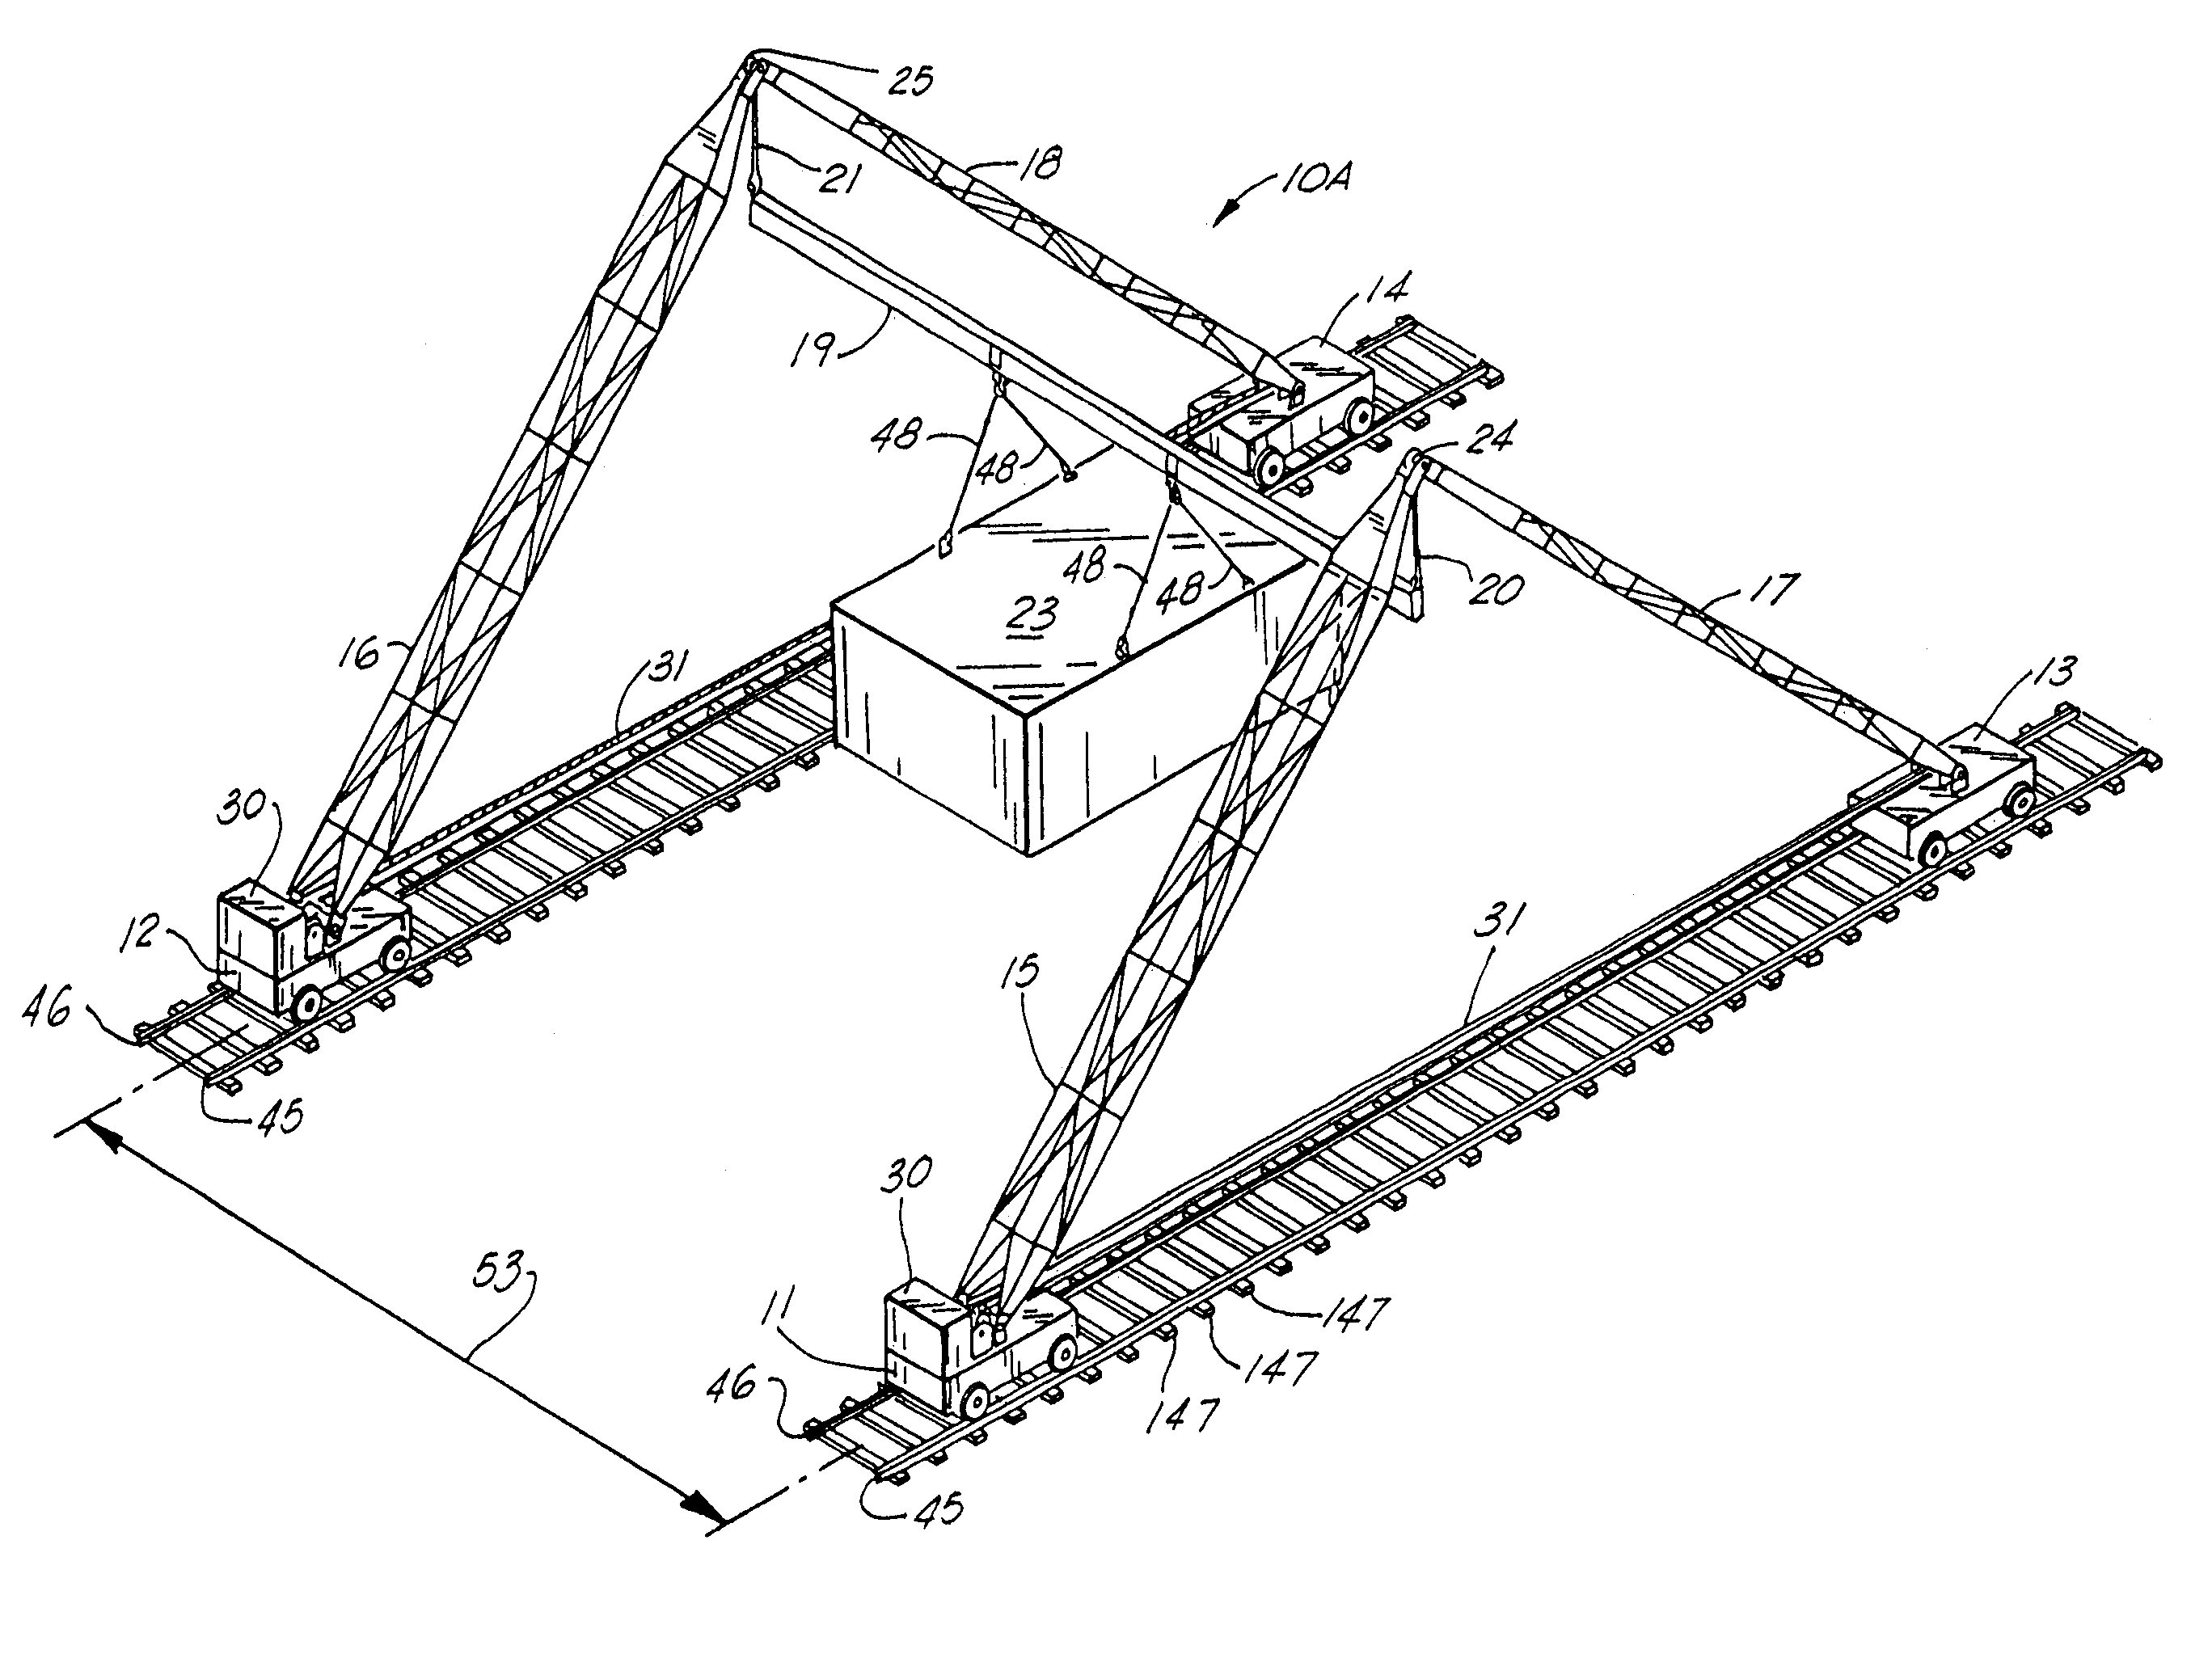 Powered lifting apparatus using multiple booms